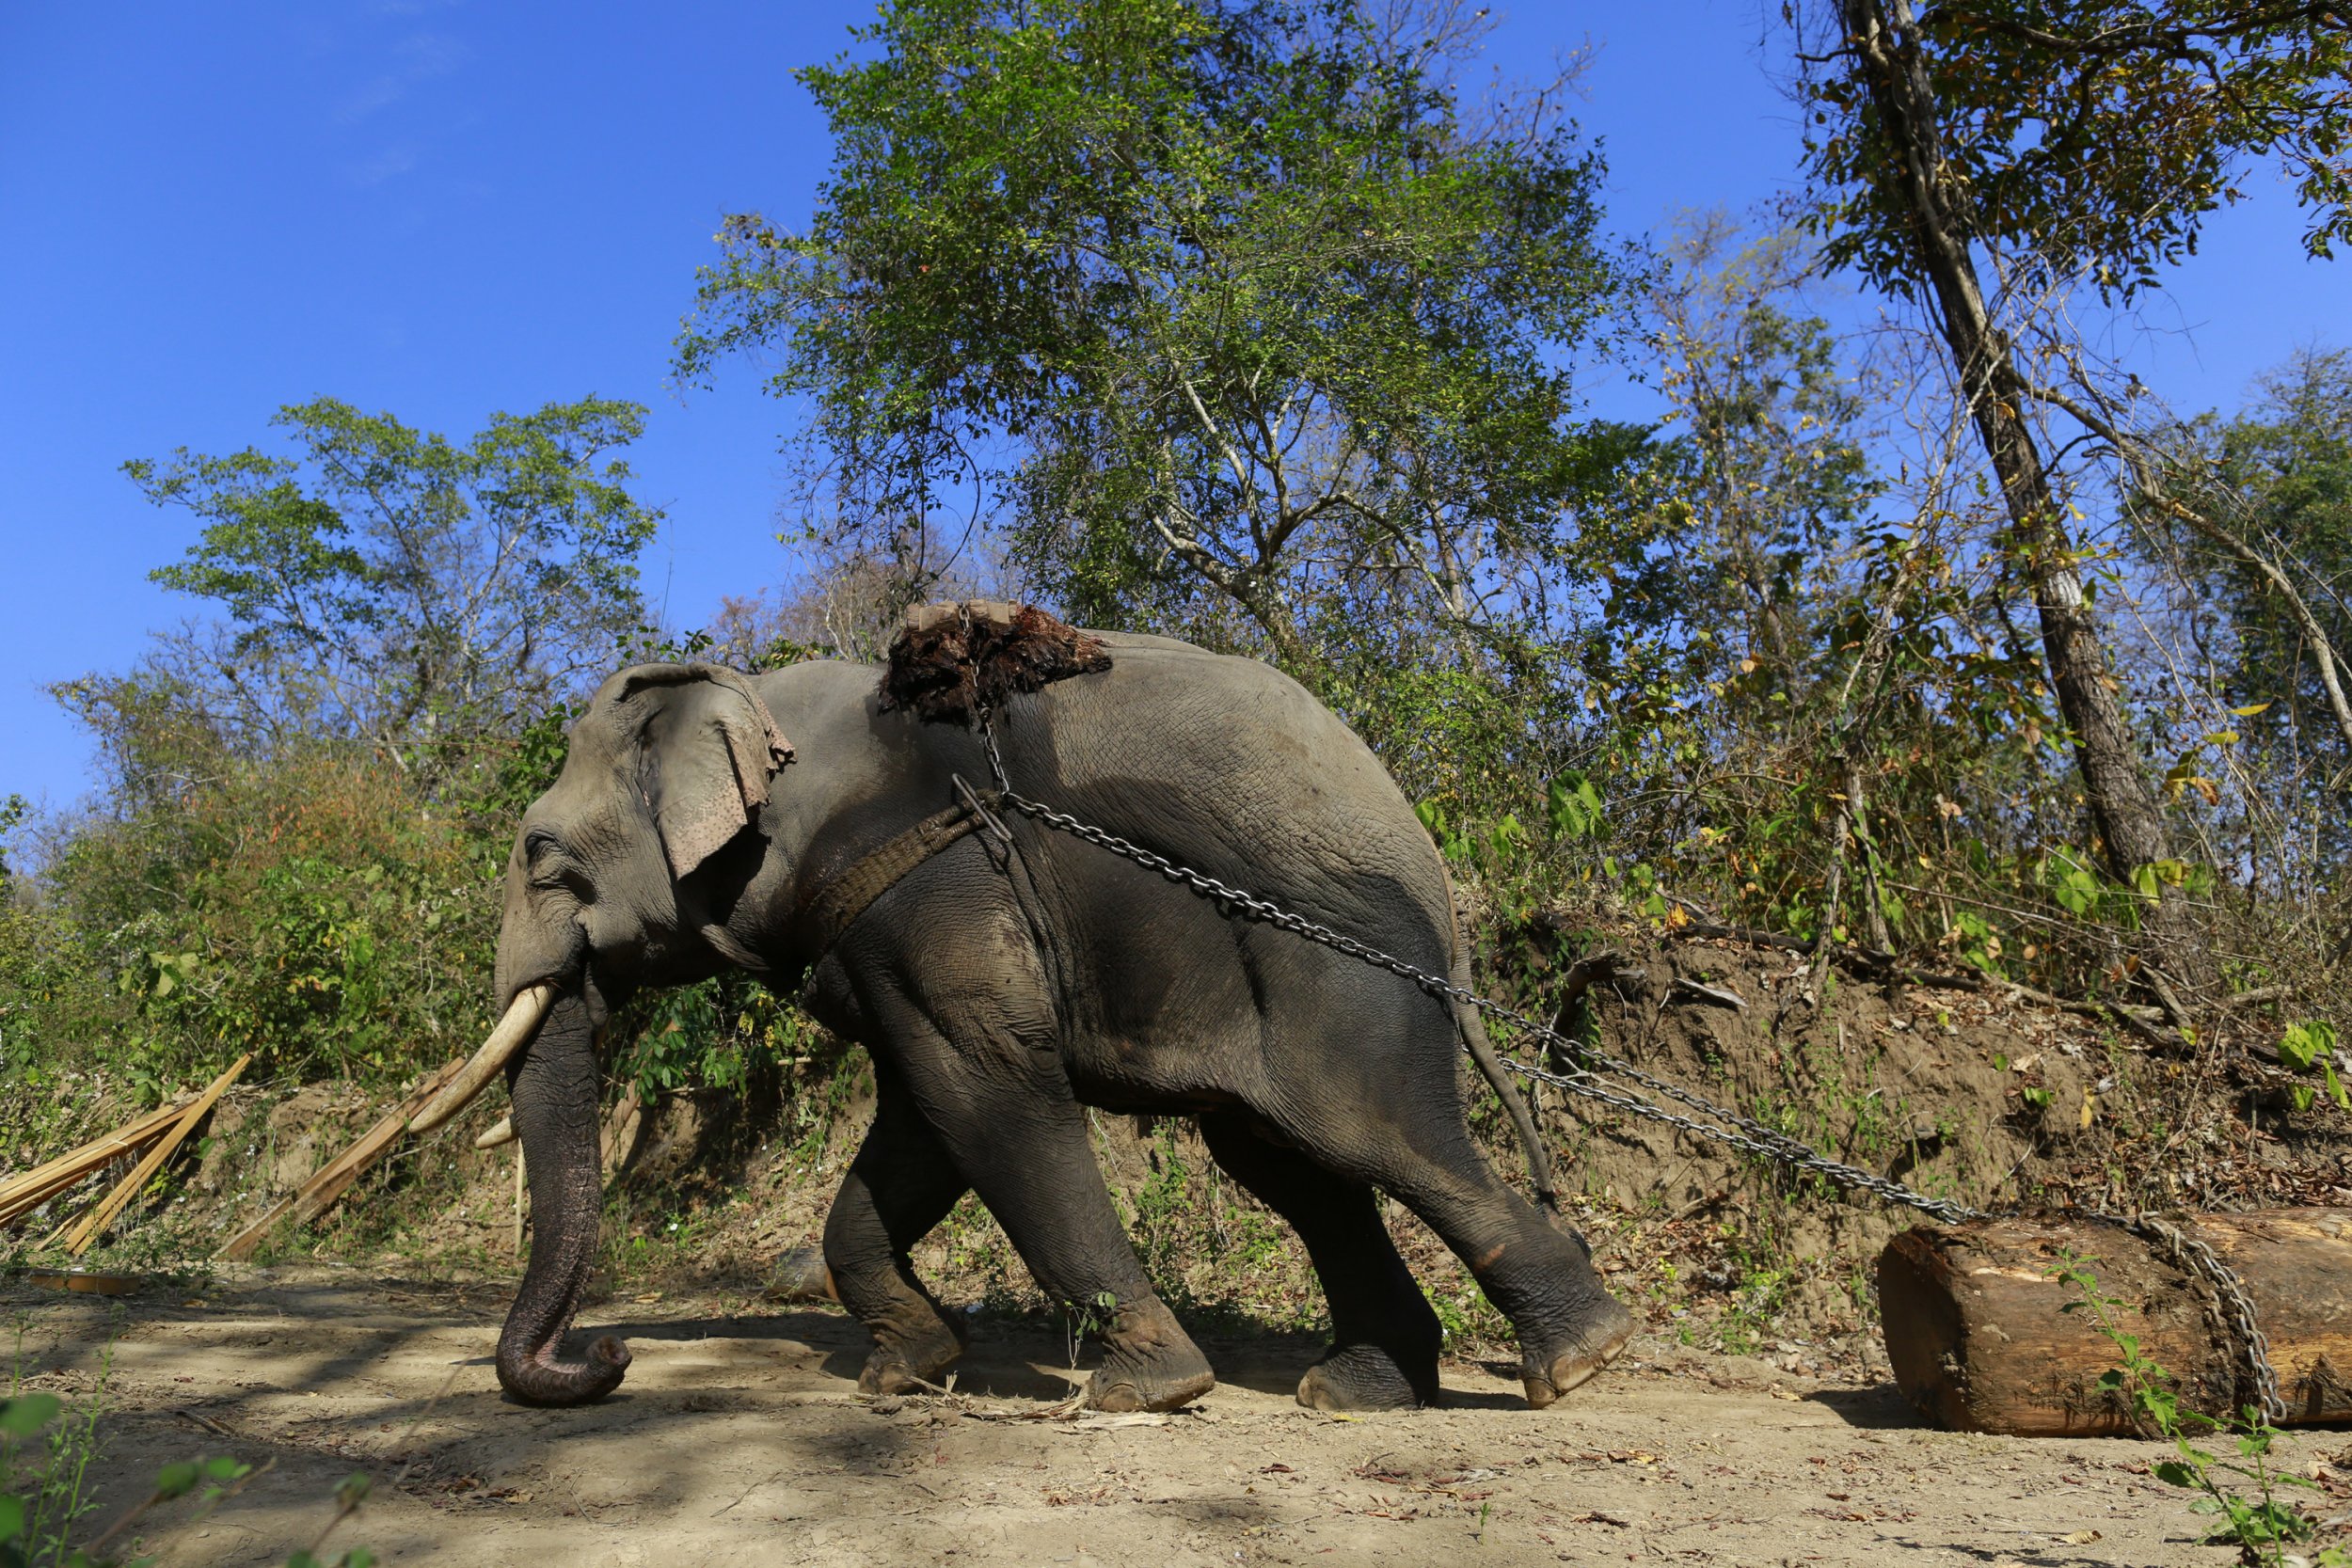 Elephants Captured From the Wild Live Shorter Lives Than